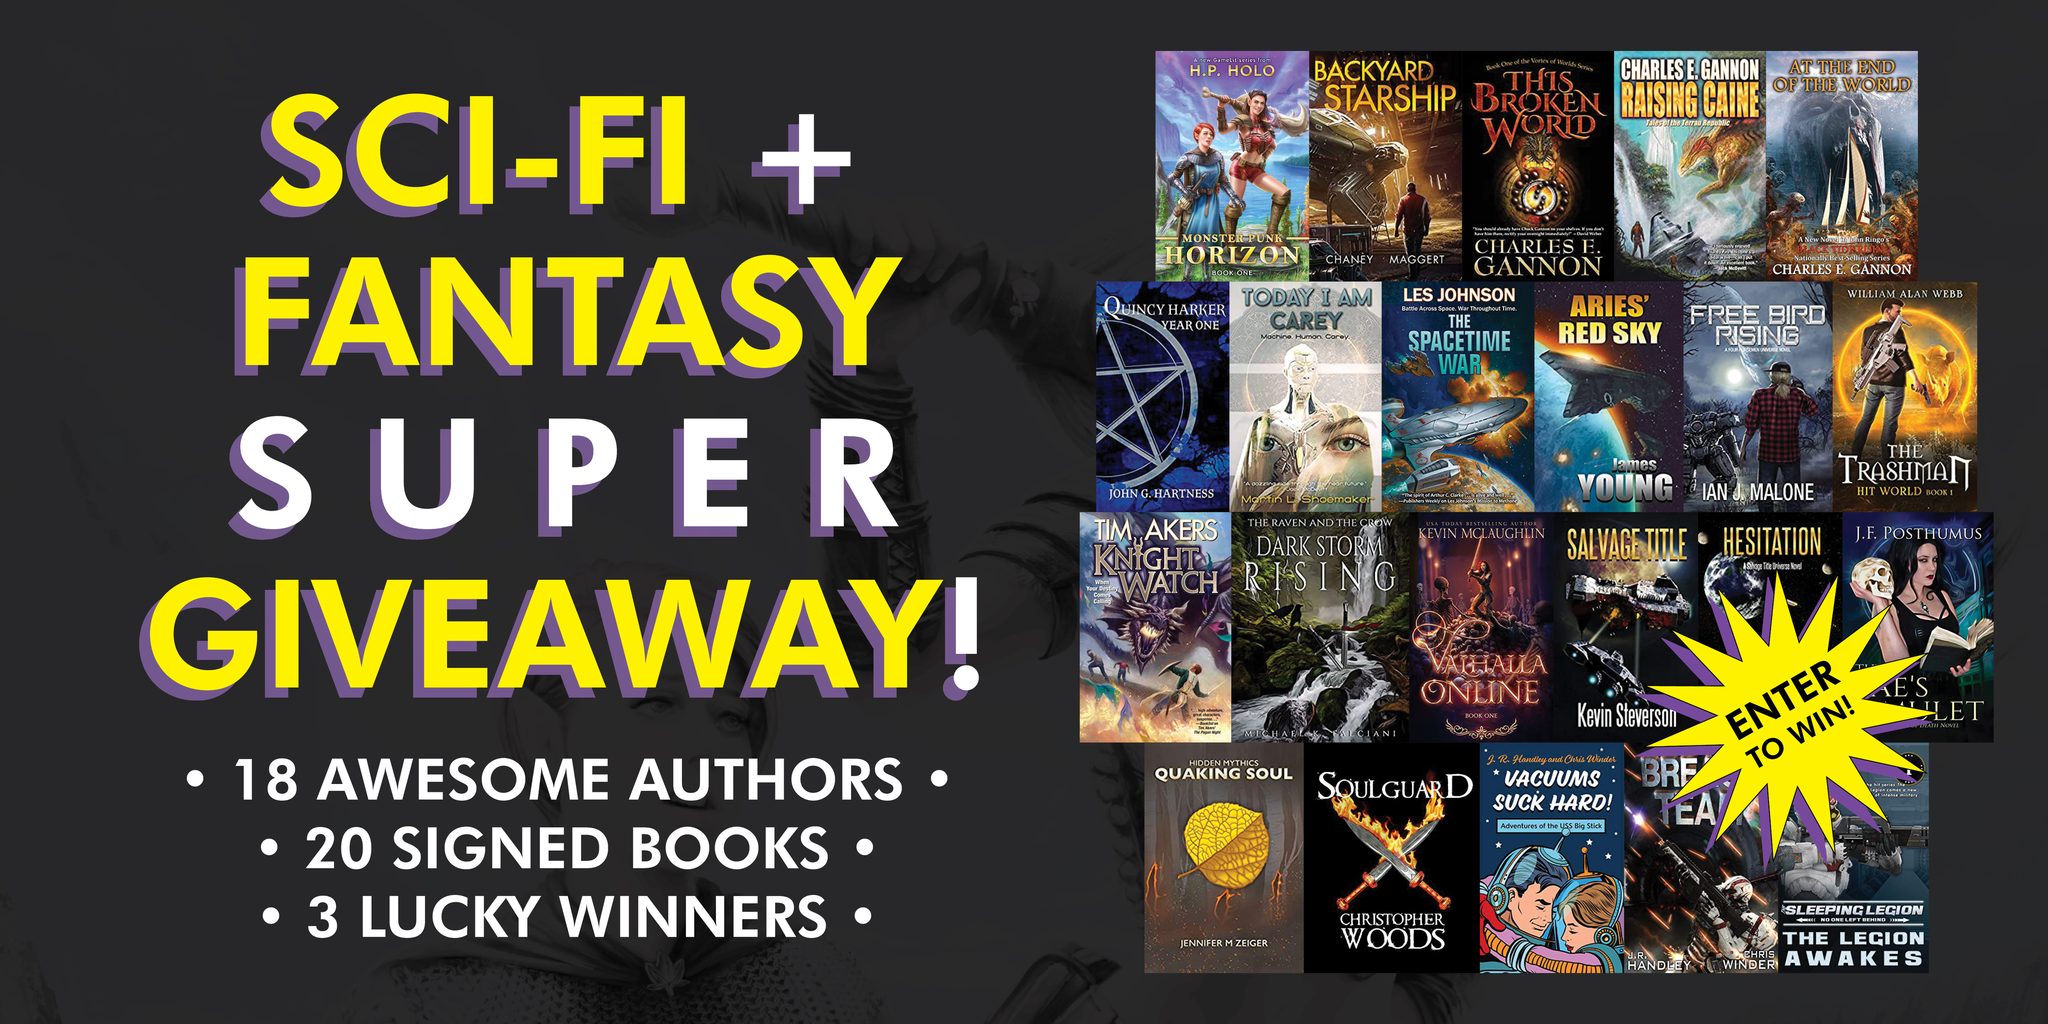 Love free books? Then you’ll want to sign up for this one with 20 signed titles!